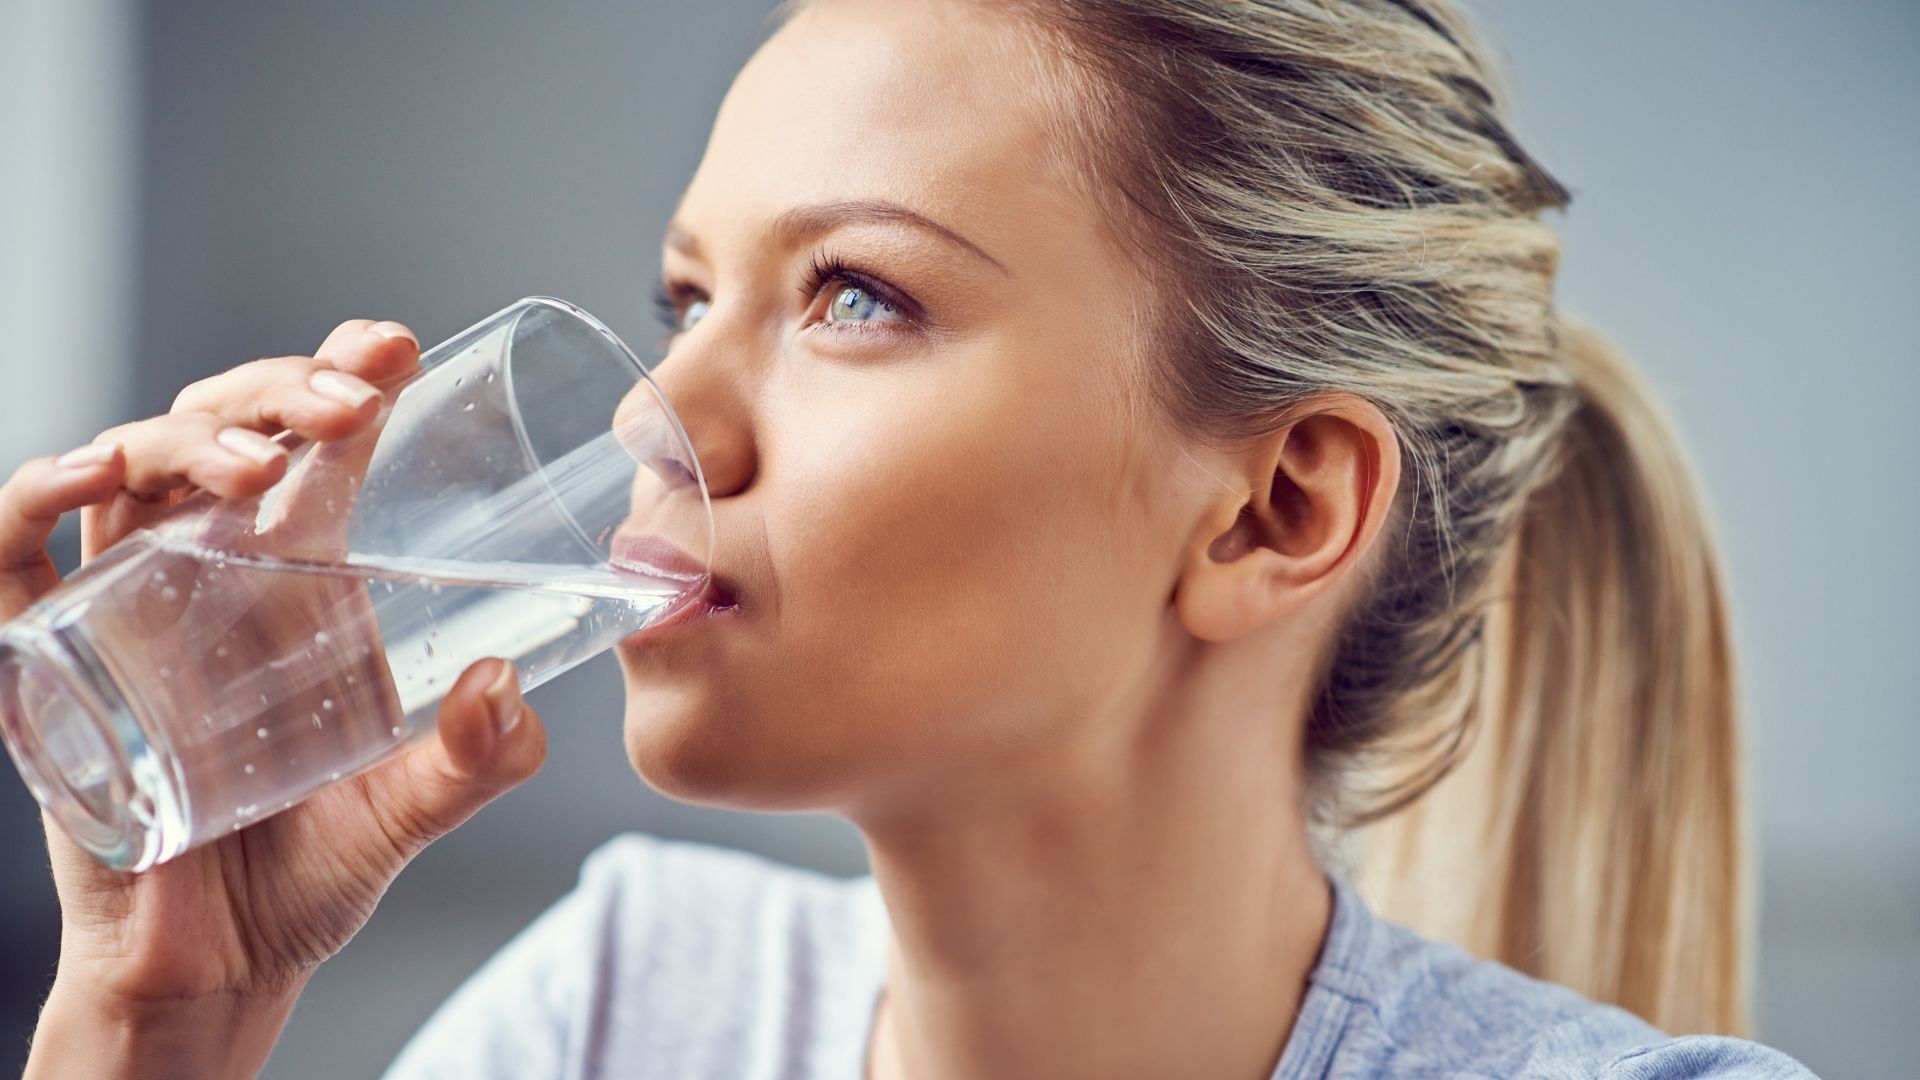 How Much Water Should I Drink Before an Ultrasound?